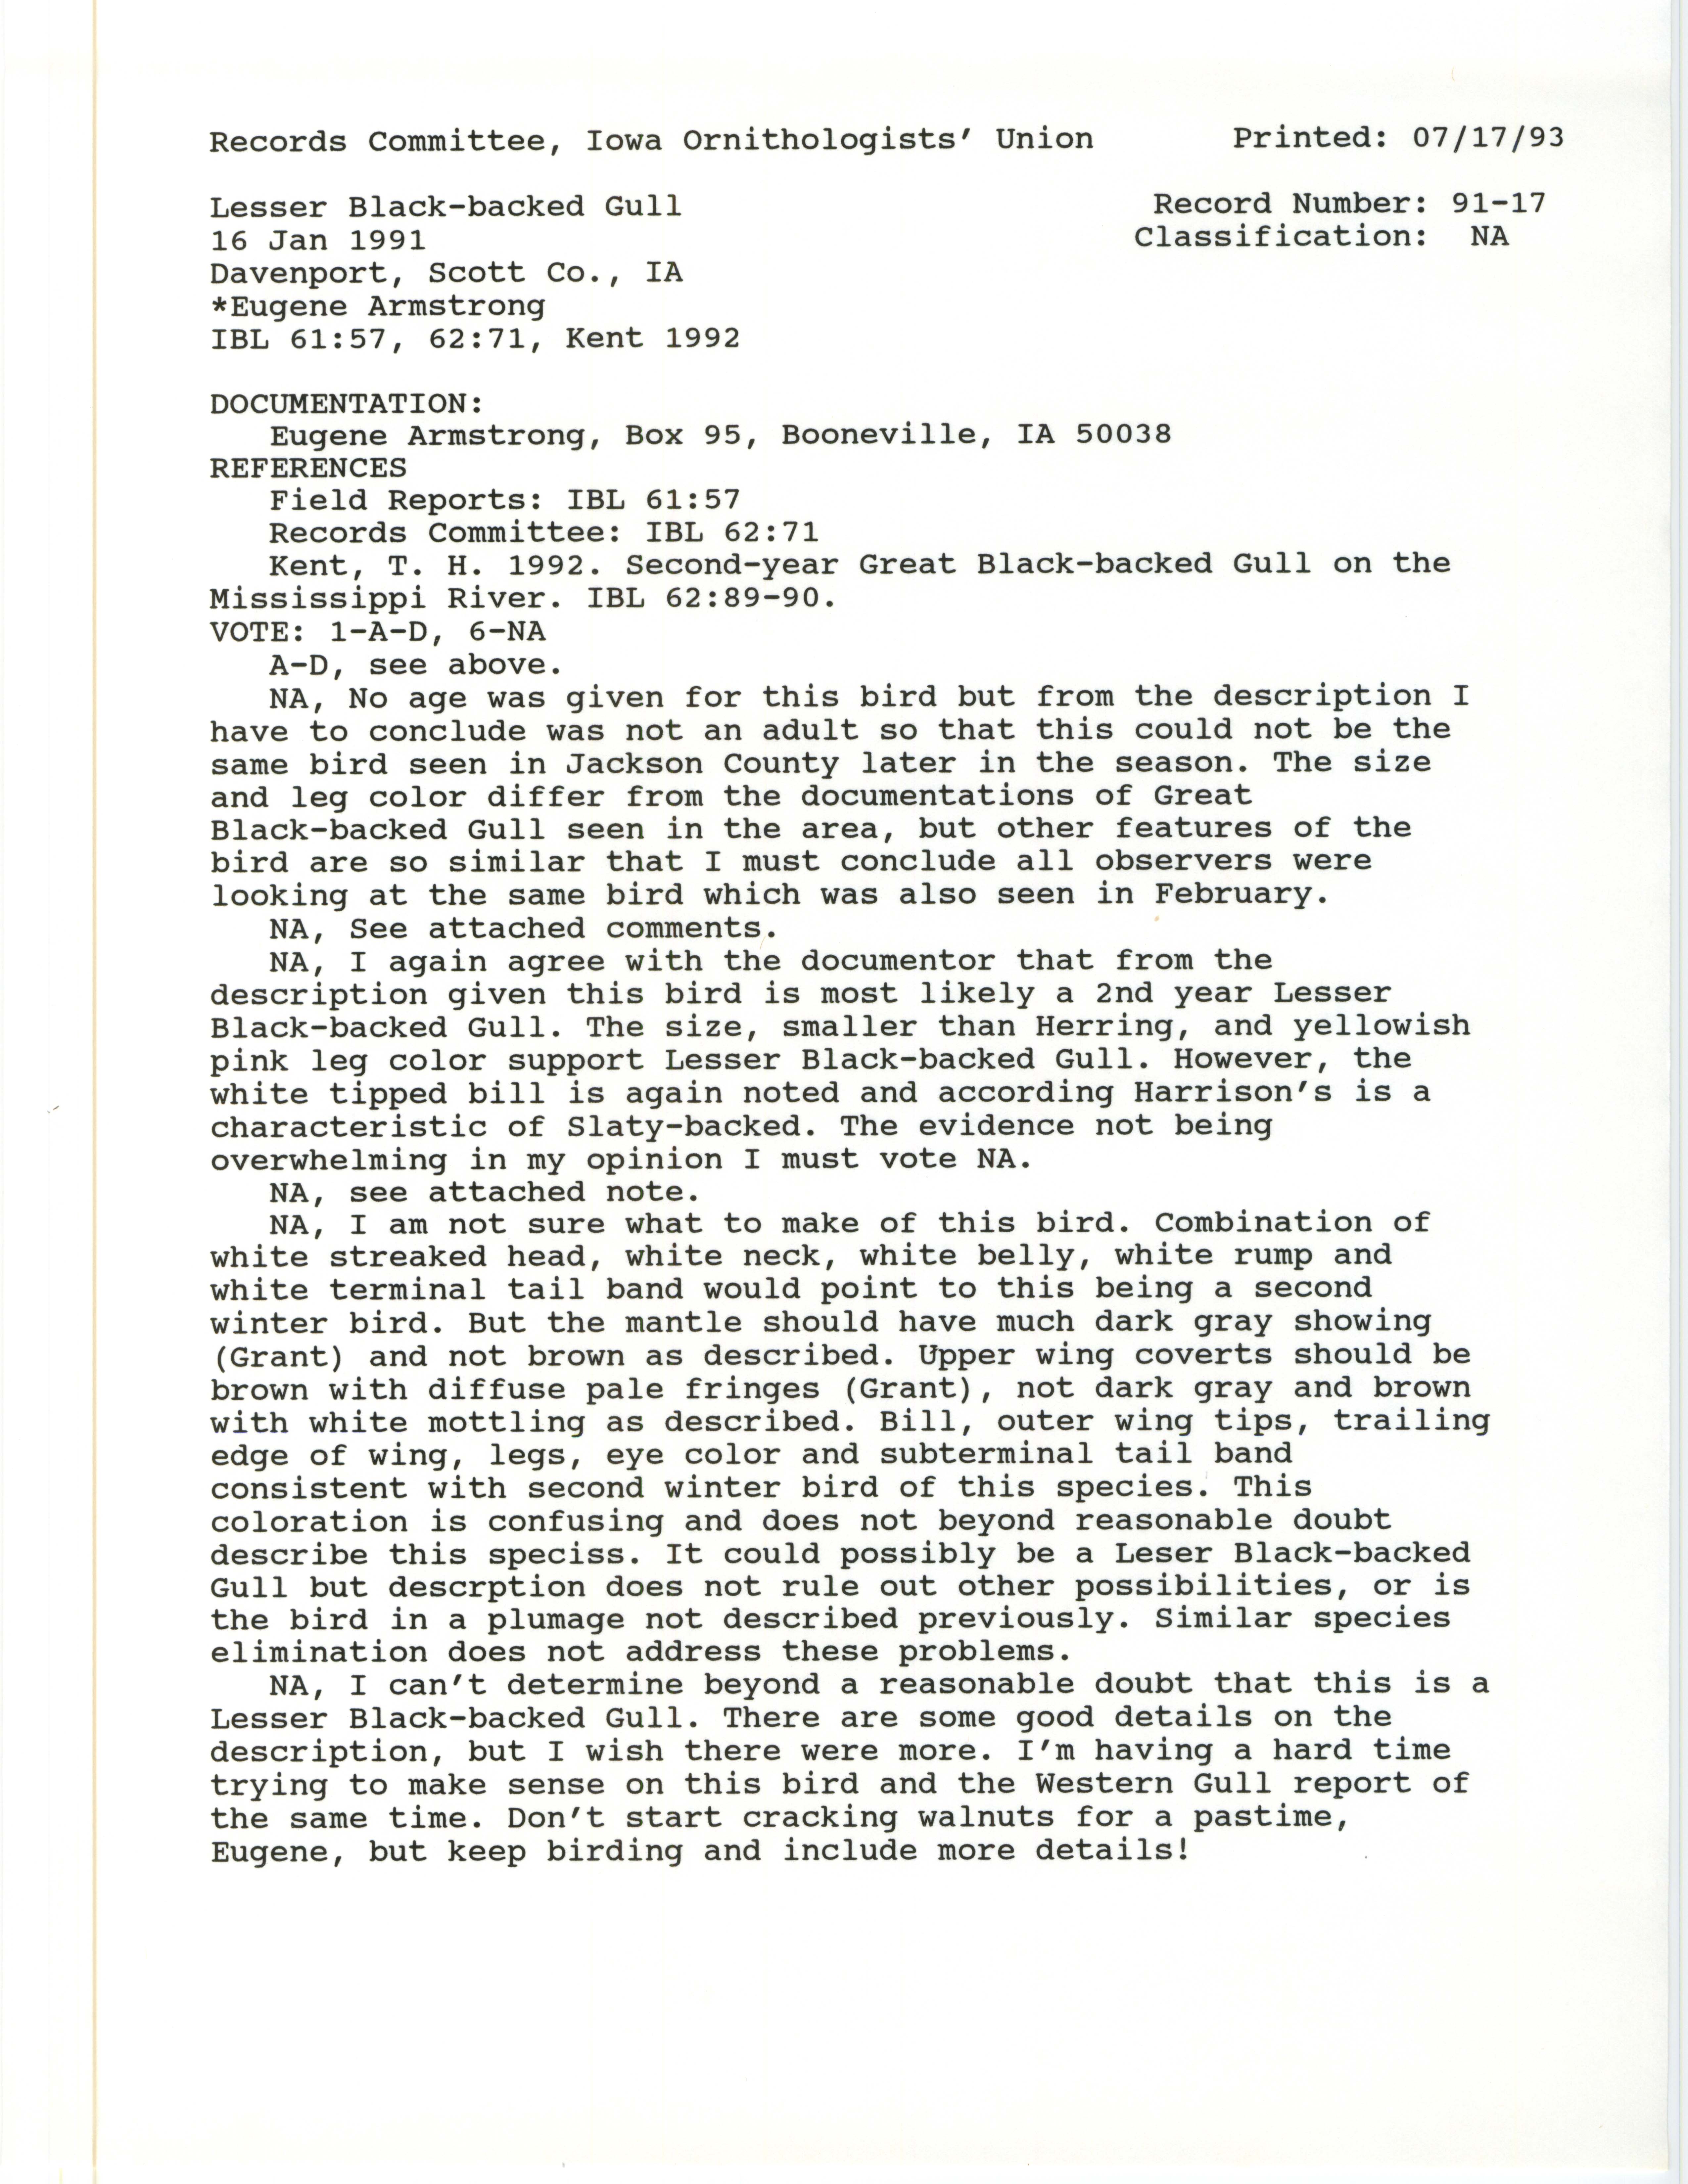 Records Committee review for rare bird sighting of Lesser Black-backed Gull at Davenport, 1991